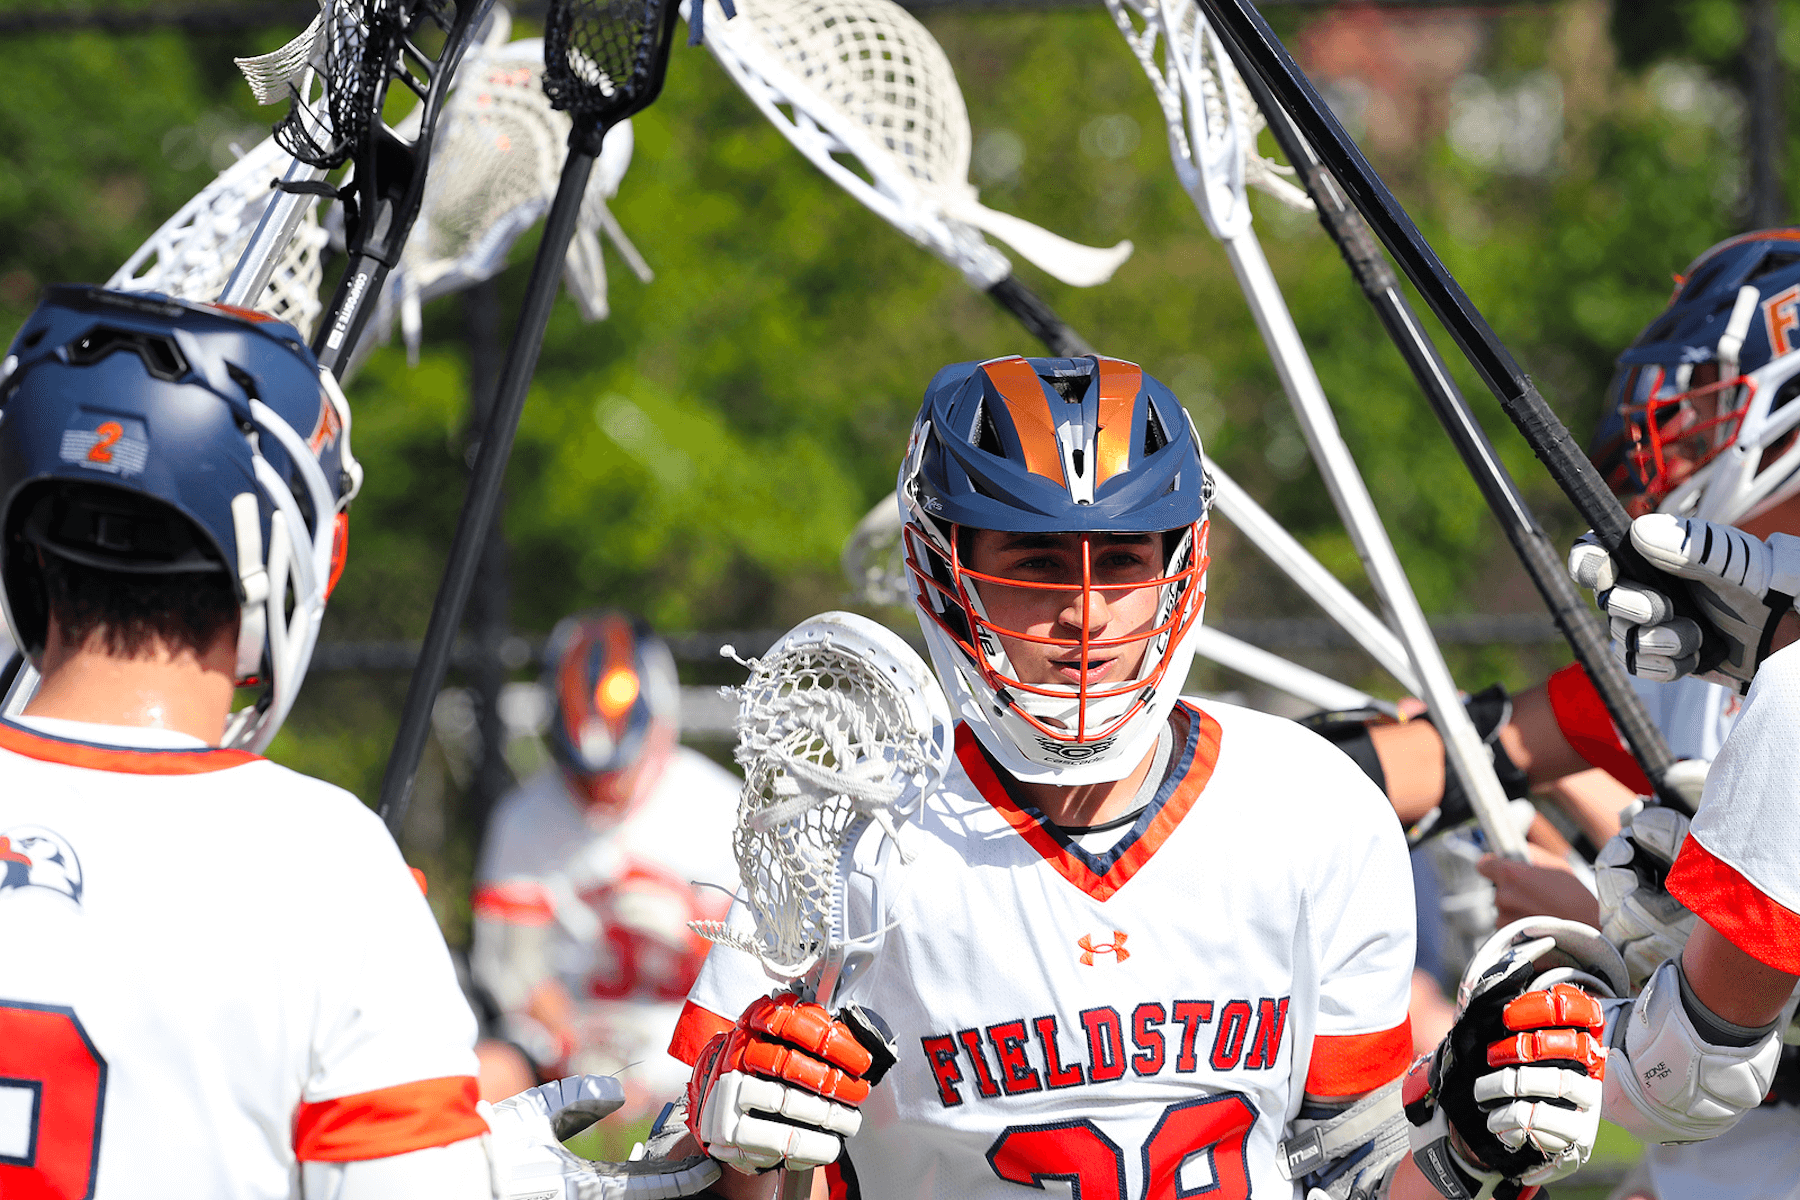 An Ethical Culture Fieldston lacrosse player plays at Spring Fling.